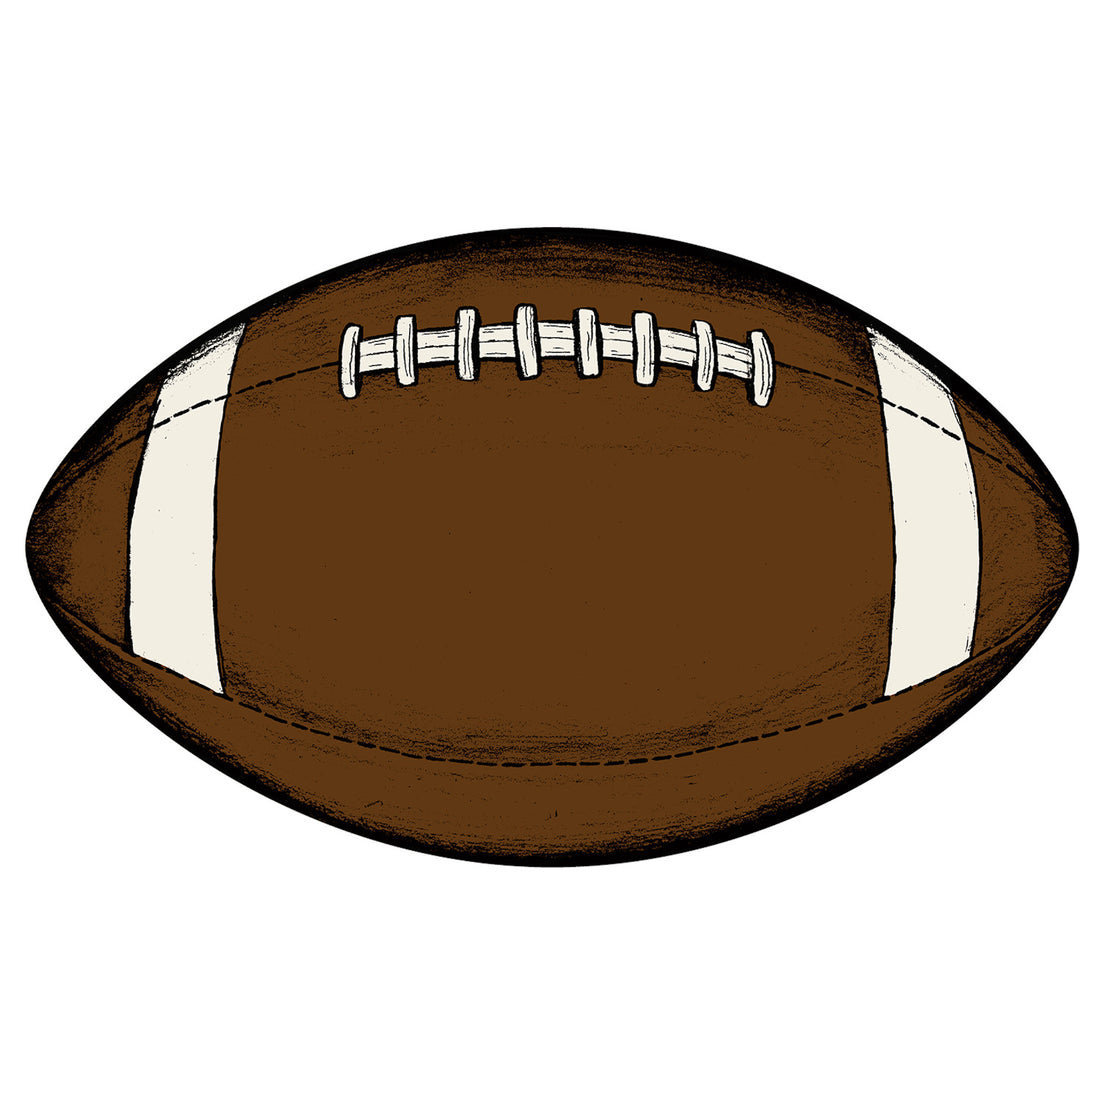 An illustrated brown and white die-cut football with black outlines.